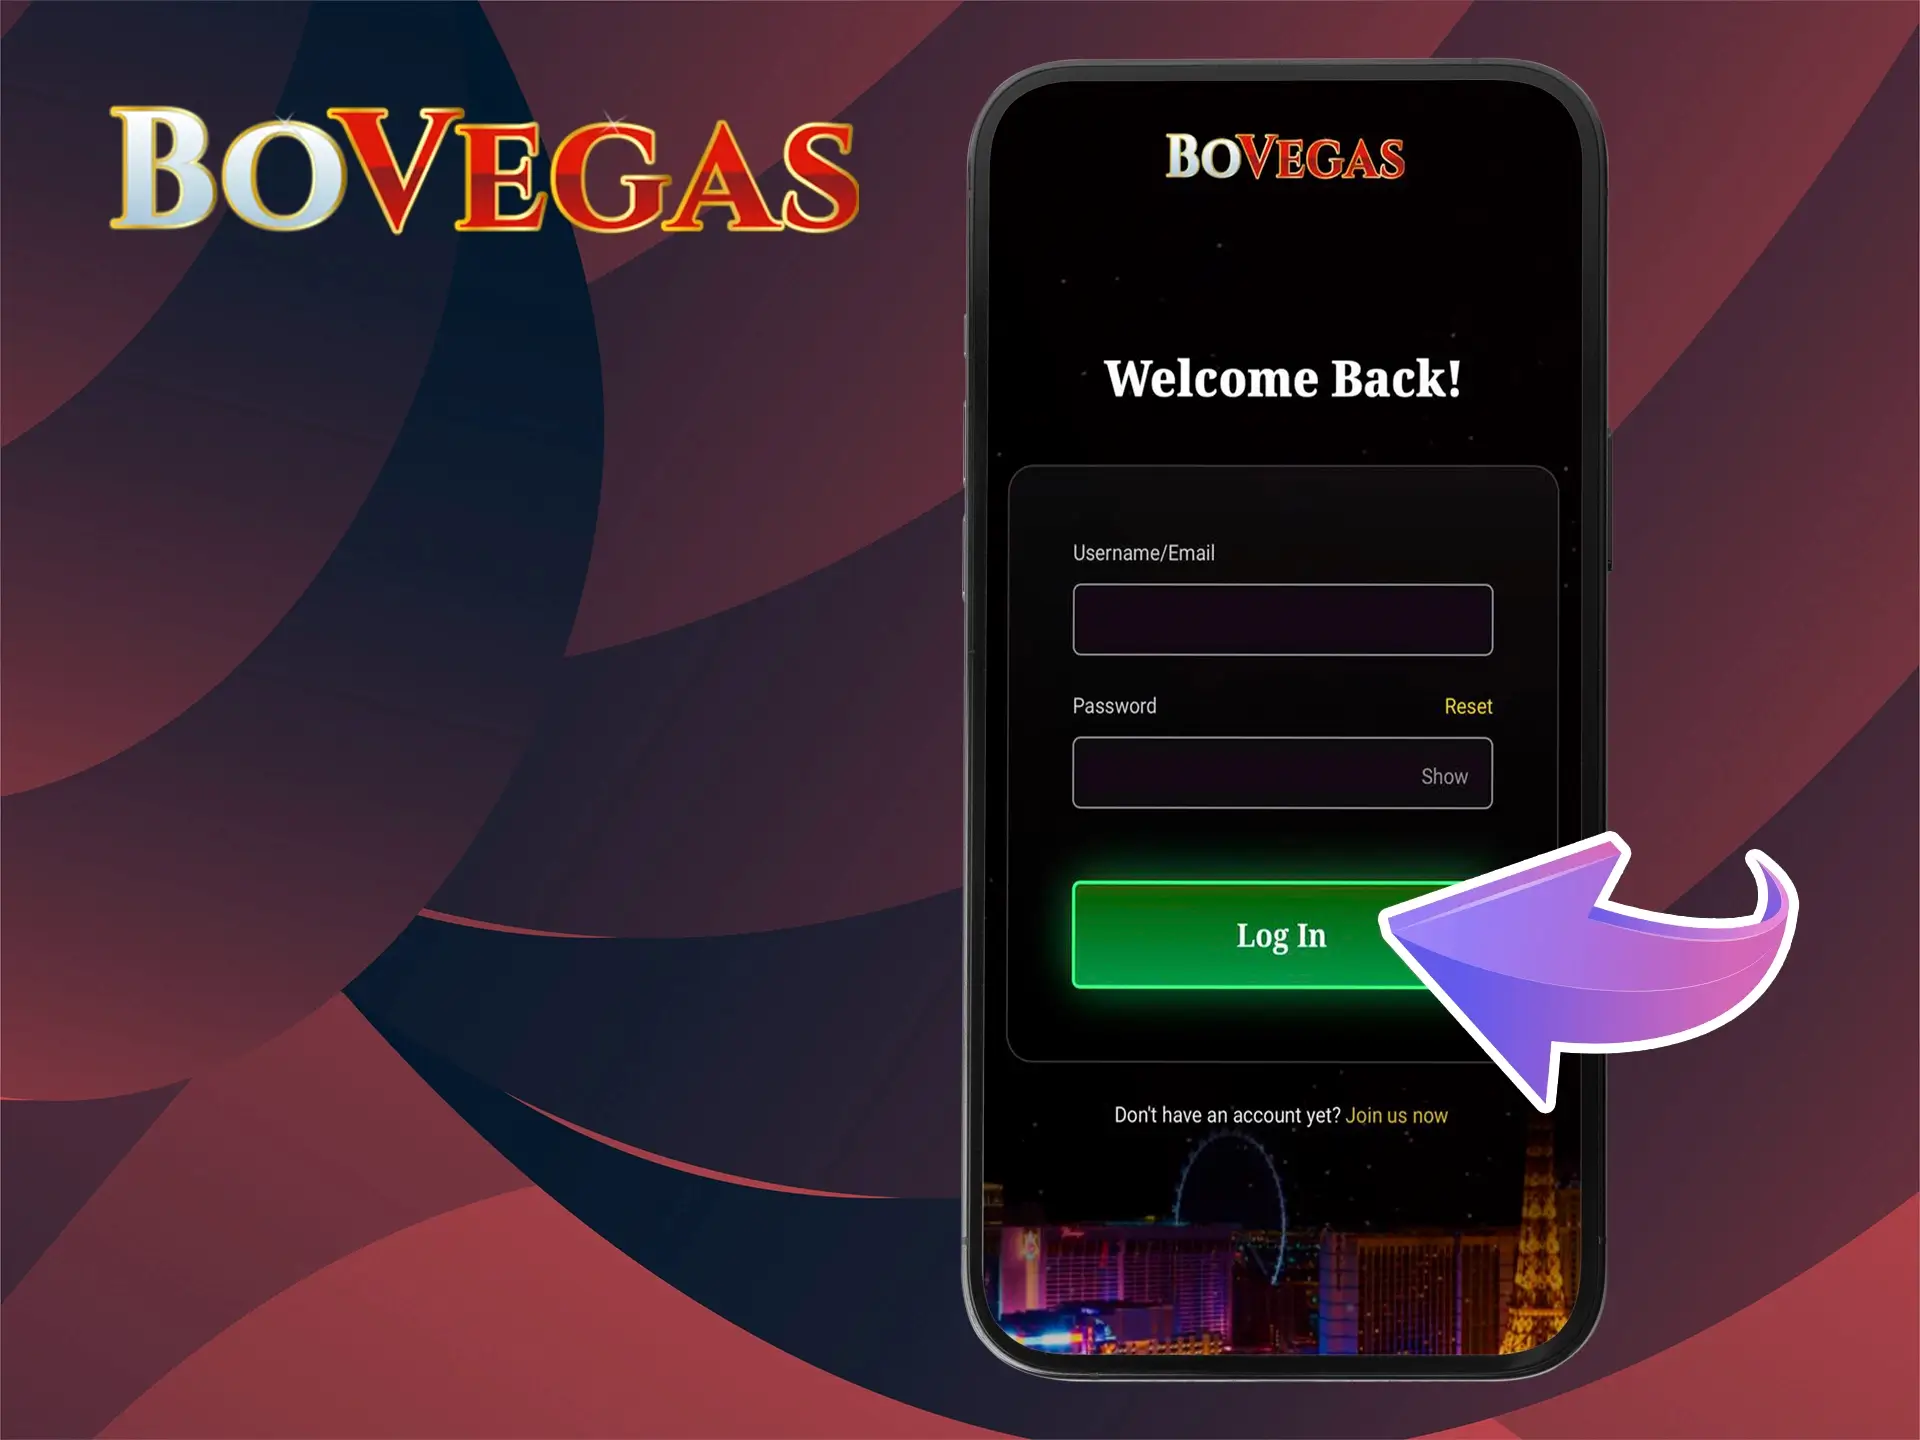 Type BoVegas website in the address bar and log in to your account.